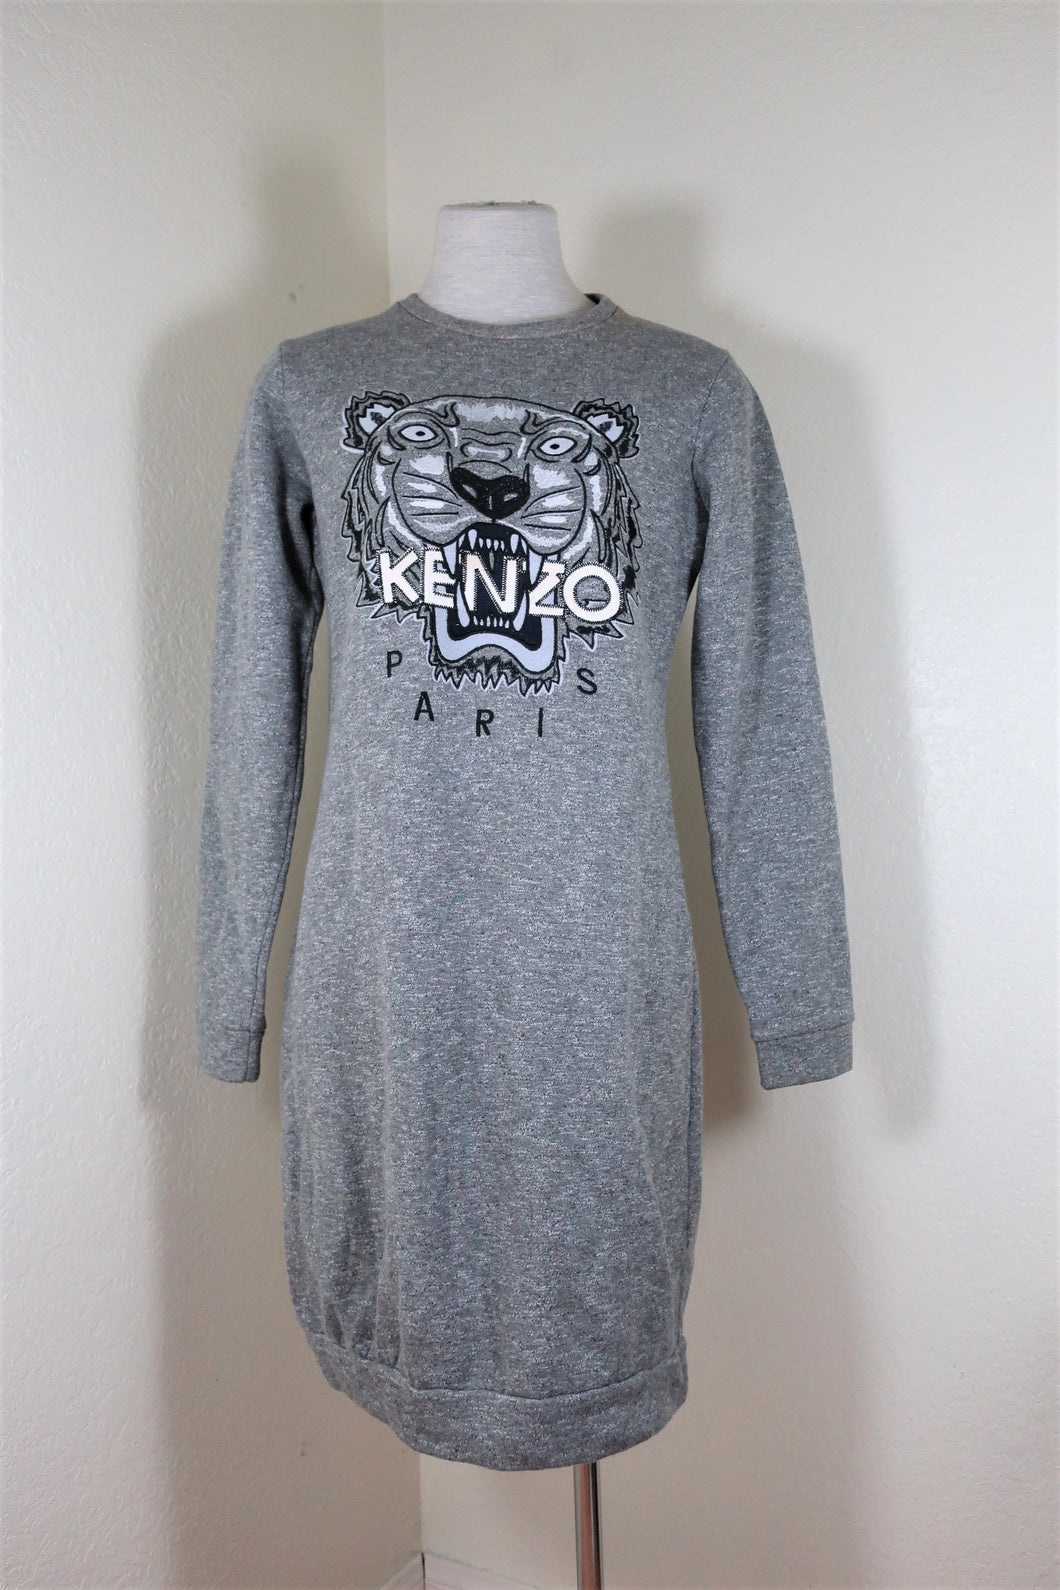 KENZO Grey Cotton Tiger Embroidered Thick Long Sleeve Dress S M 4 5 6